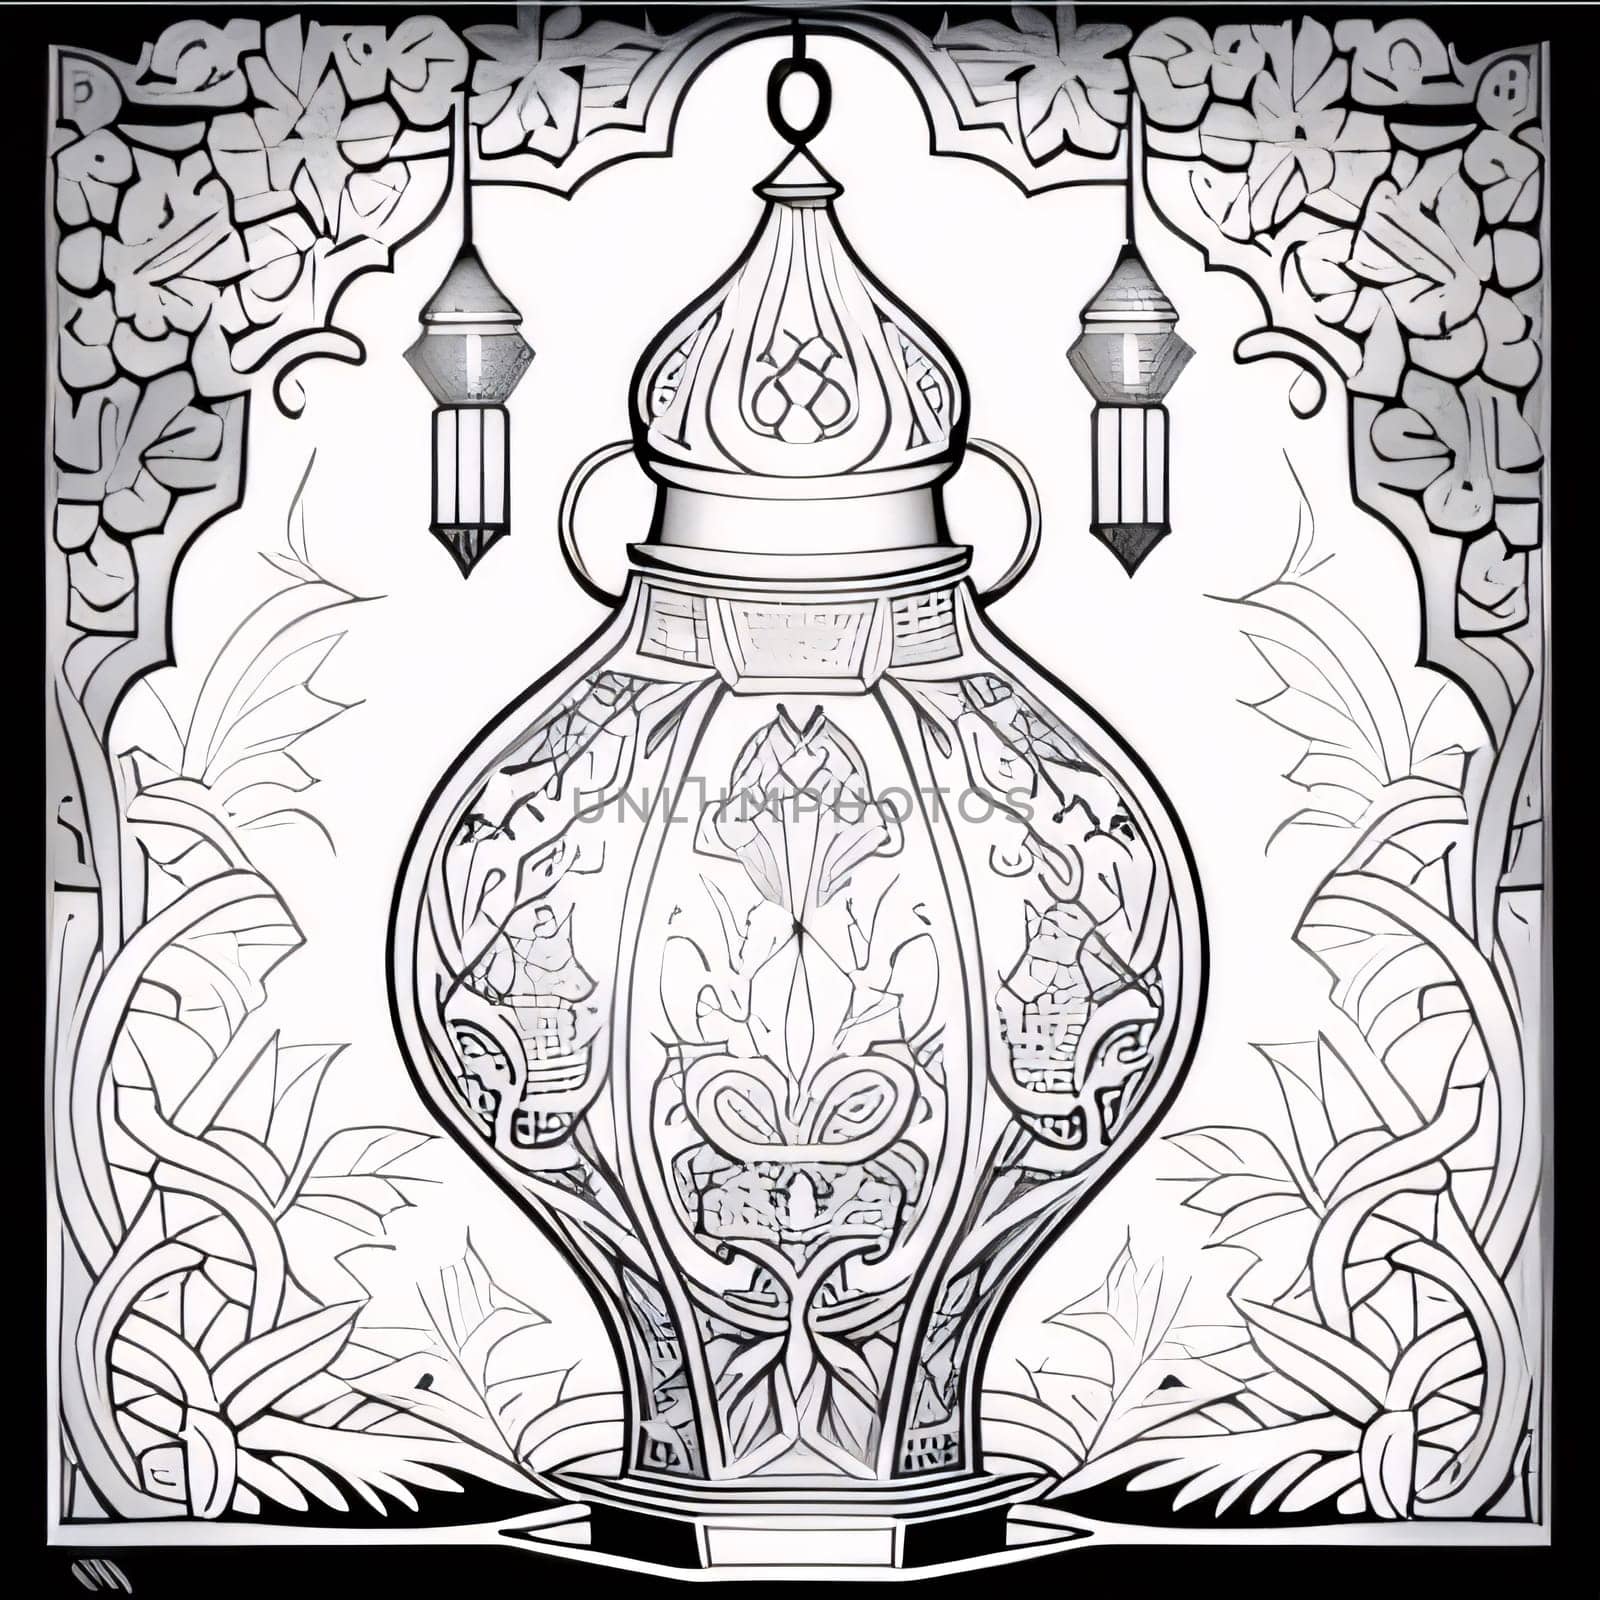 Black and white coloring sheet, richly decorated lantern. Lantern as a symbol of Ramadan for Muslims. A time to meet with God.